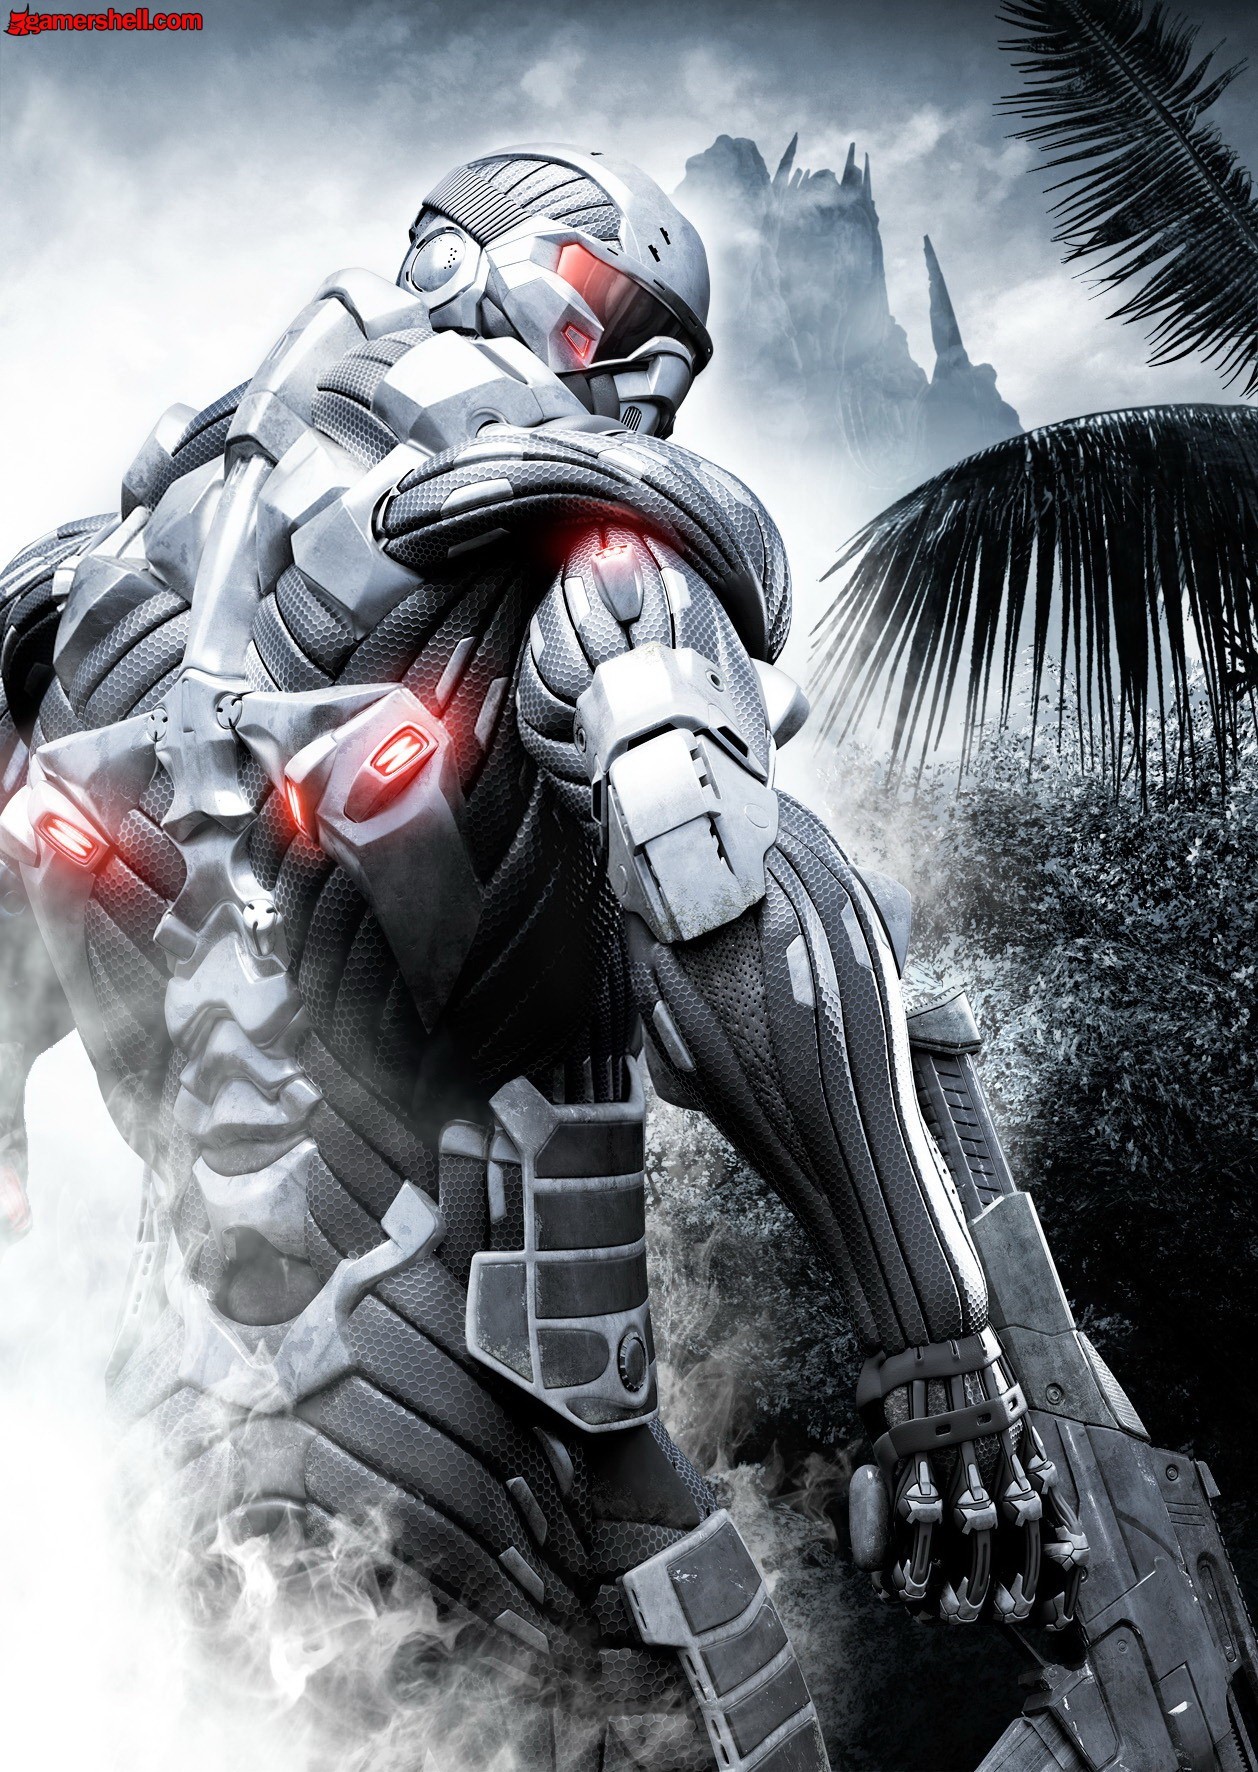 games, crysis wallpaper for mobile